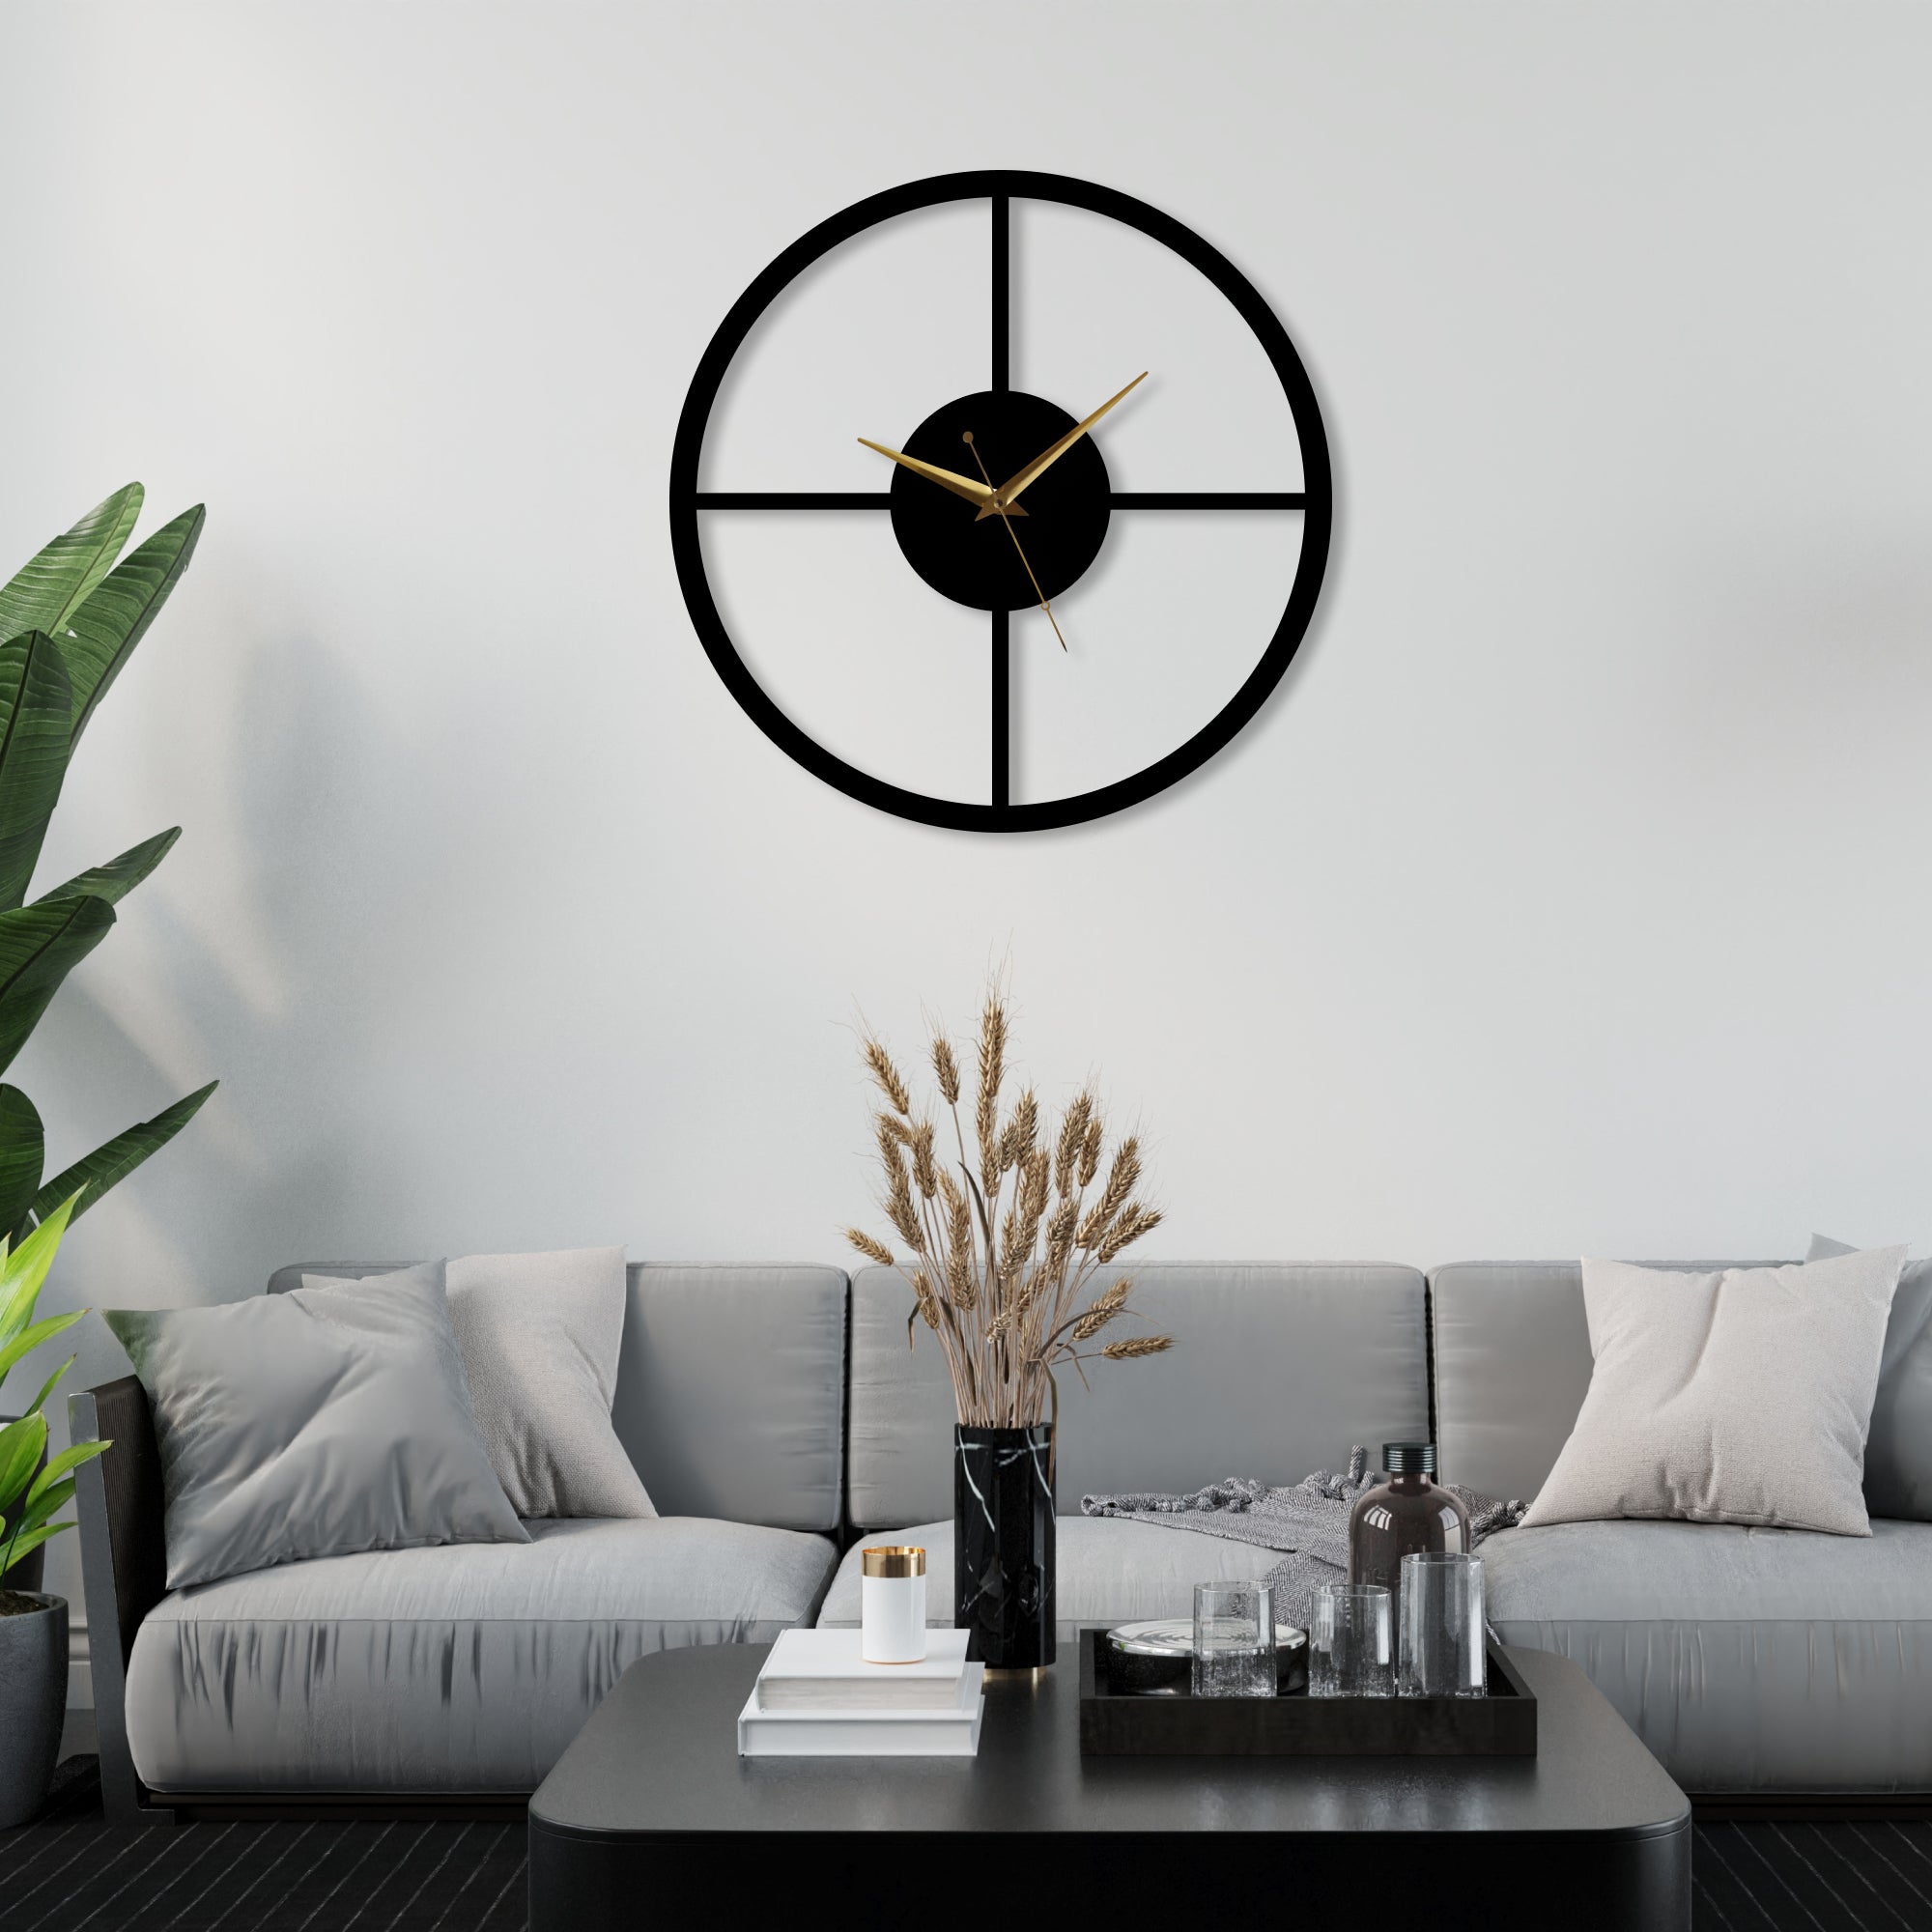 Creative Wrought Iron Large Wall Clocks Homesense Light Luxury Fashion  Decorative For Living Room From Grapname, $153.2 | DHgate.Com